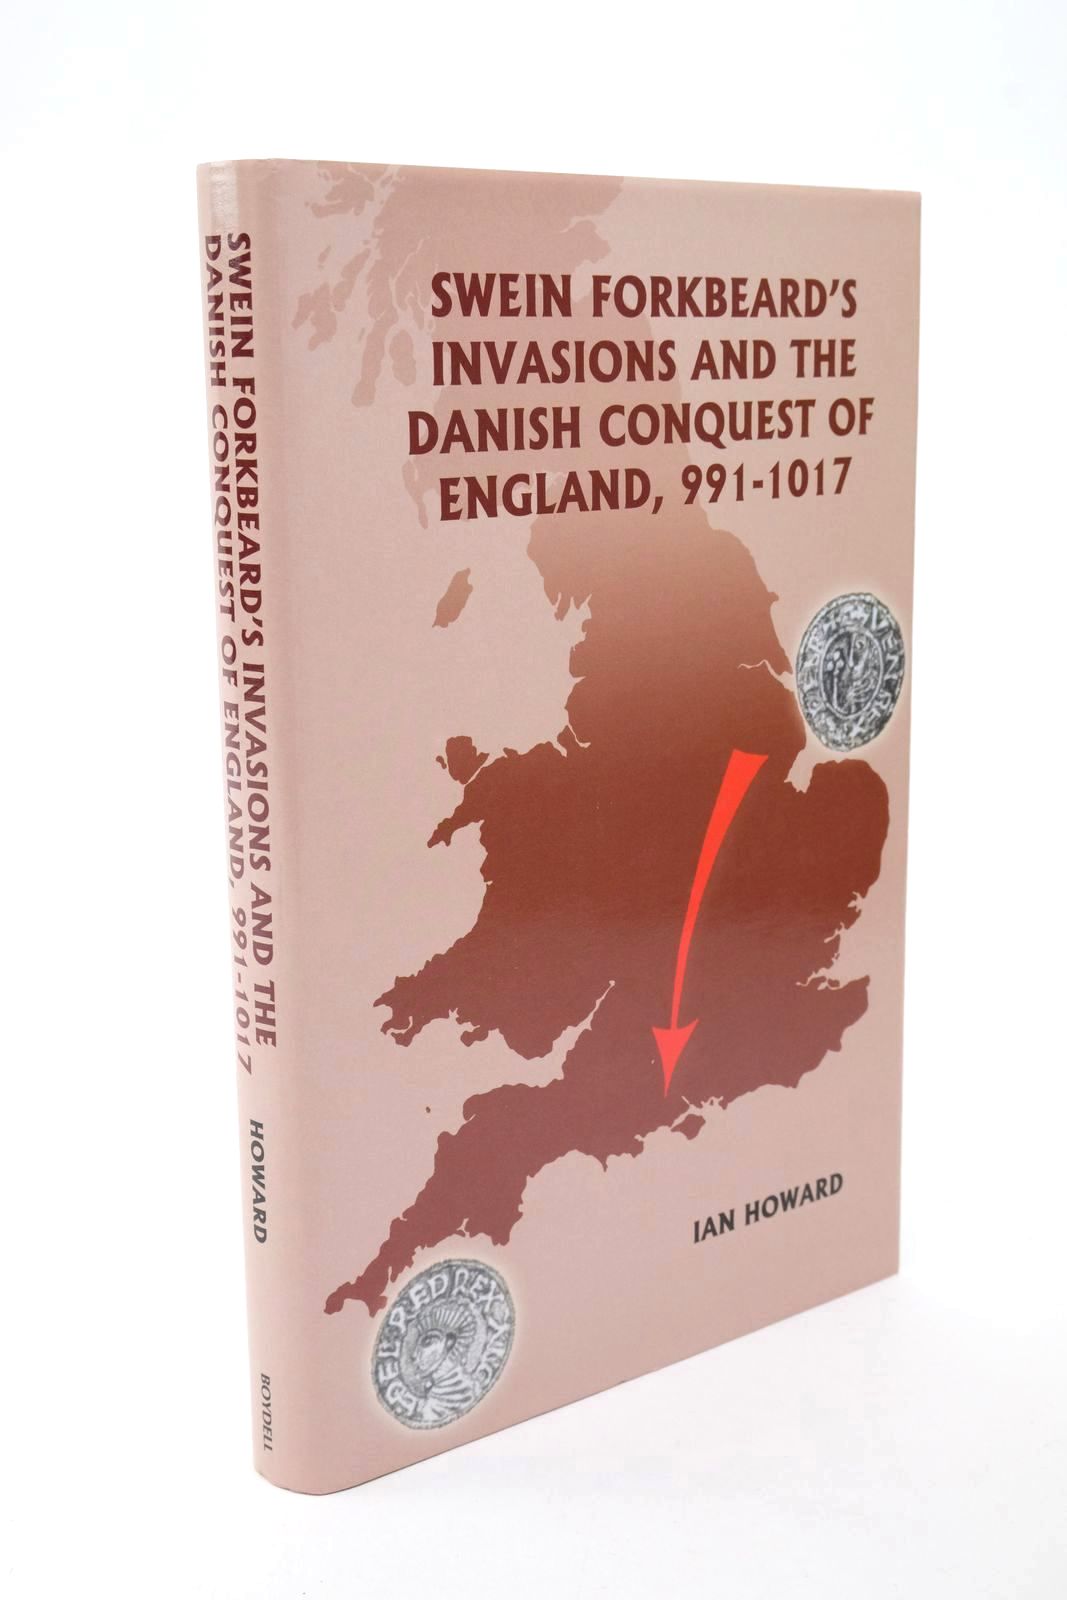 Photo of SWEIN FORKBEARD'S INVASIONS AND THE DANISH CONQUEST OF ENGLAND, 991-1017 written by Howard, Ian published by The Boydell Press (STOCK CODE: 1322610)  for sale by Stella & Rose's Books